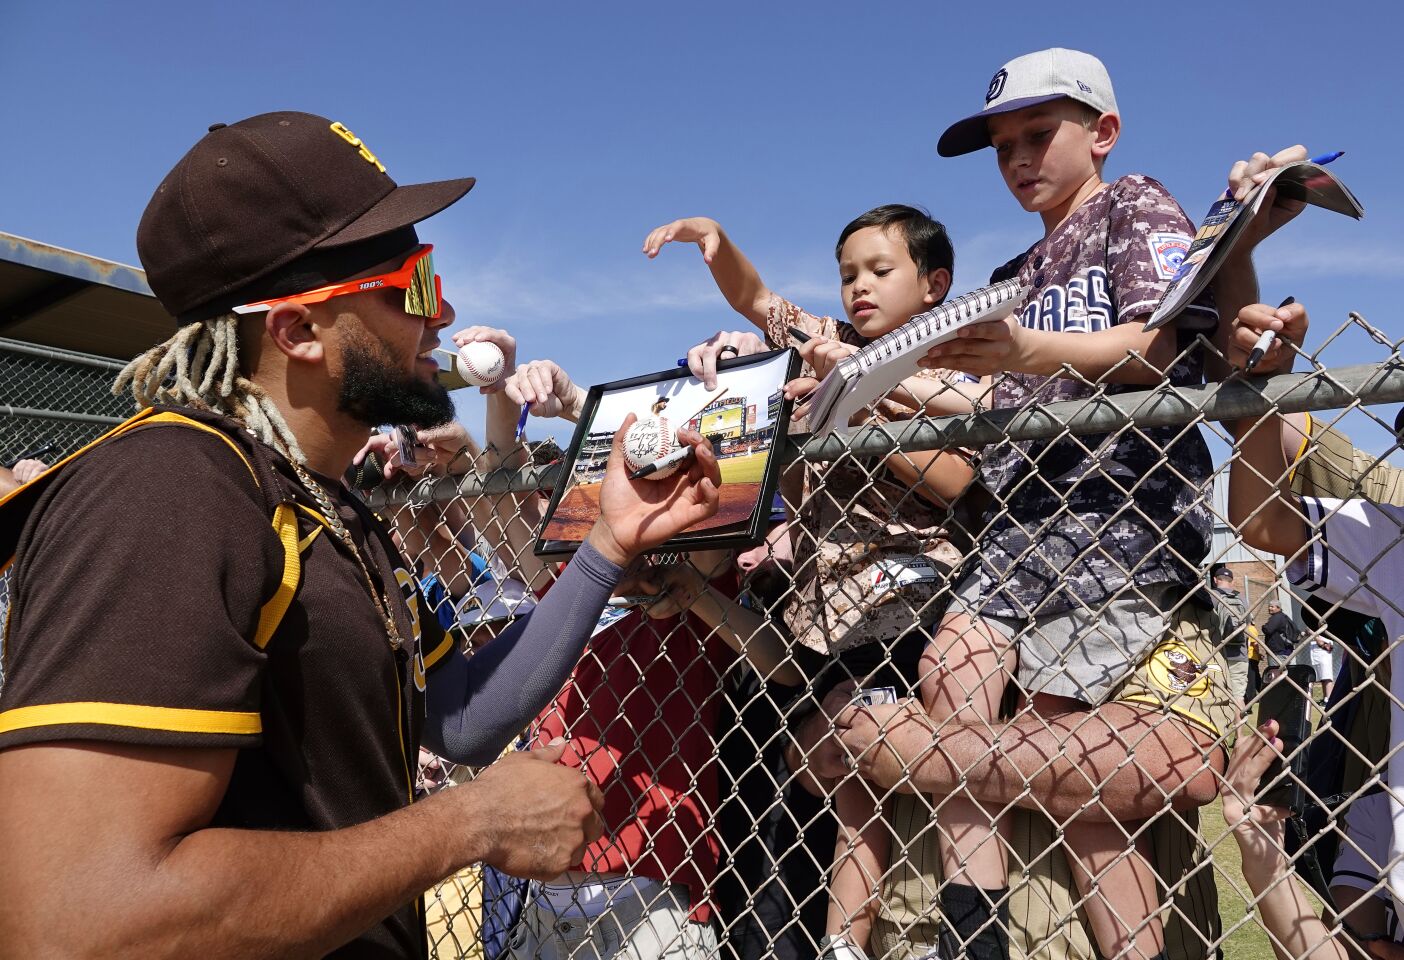 San Diego Padres Fernando Tatis. Jr. signs autographs for Brandon Llantada, 6, and Cleighton Baccarelli, 7, from Rancho Peñasquitos after a spring training practice on Feb. 18, 2020.